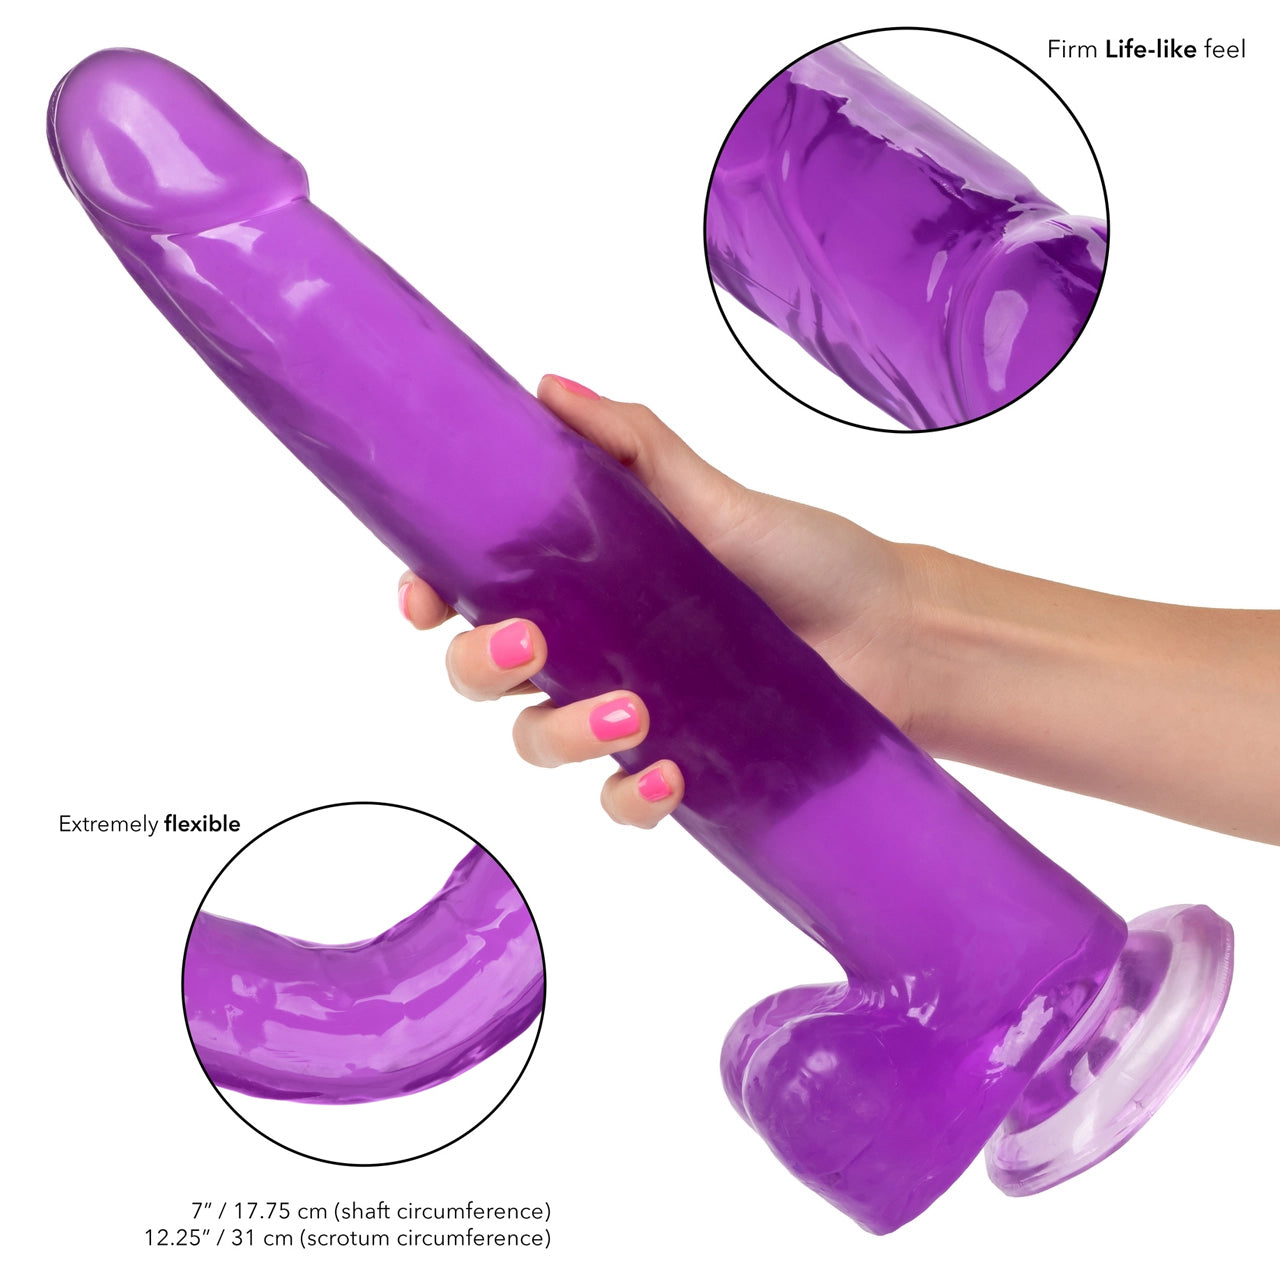 Size Queen 12 Inch Realistic Suction Cup Dildo Dong PURPLE by Cal Exot pic